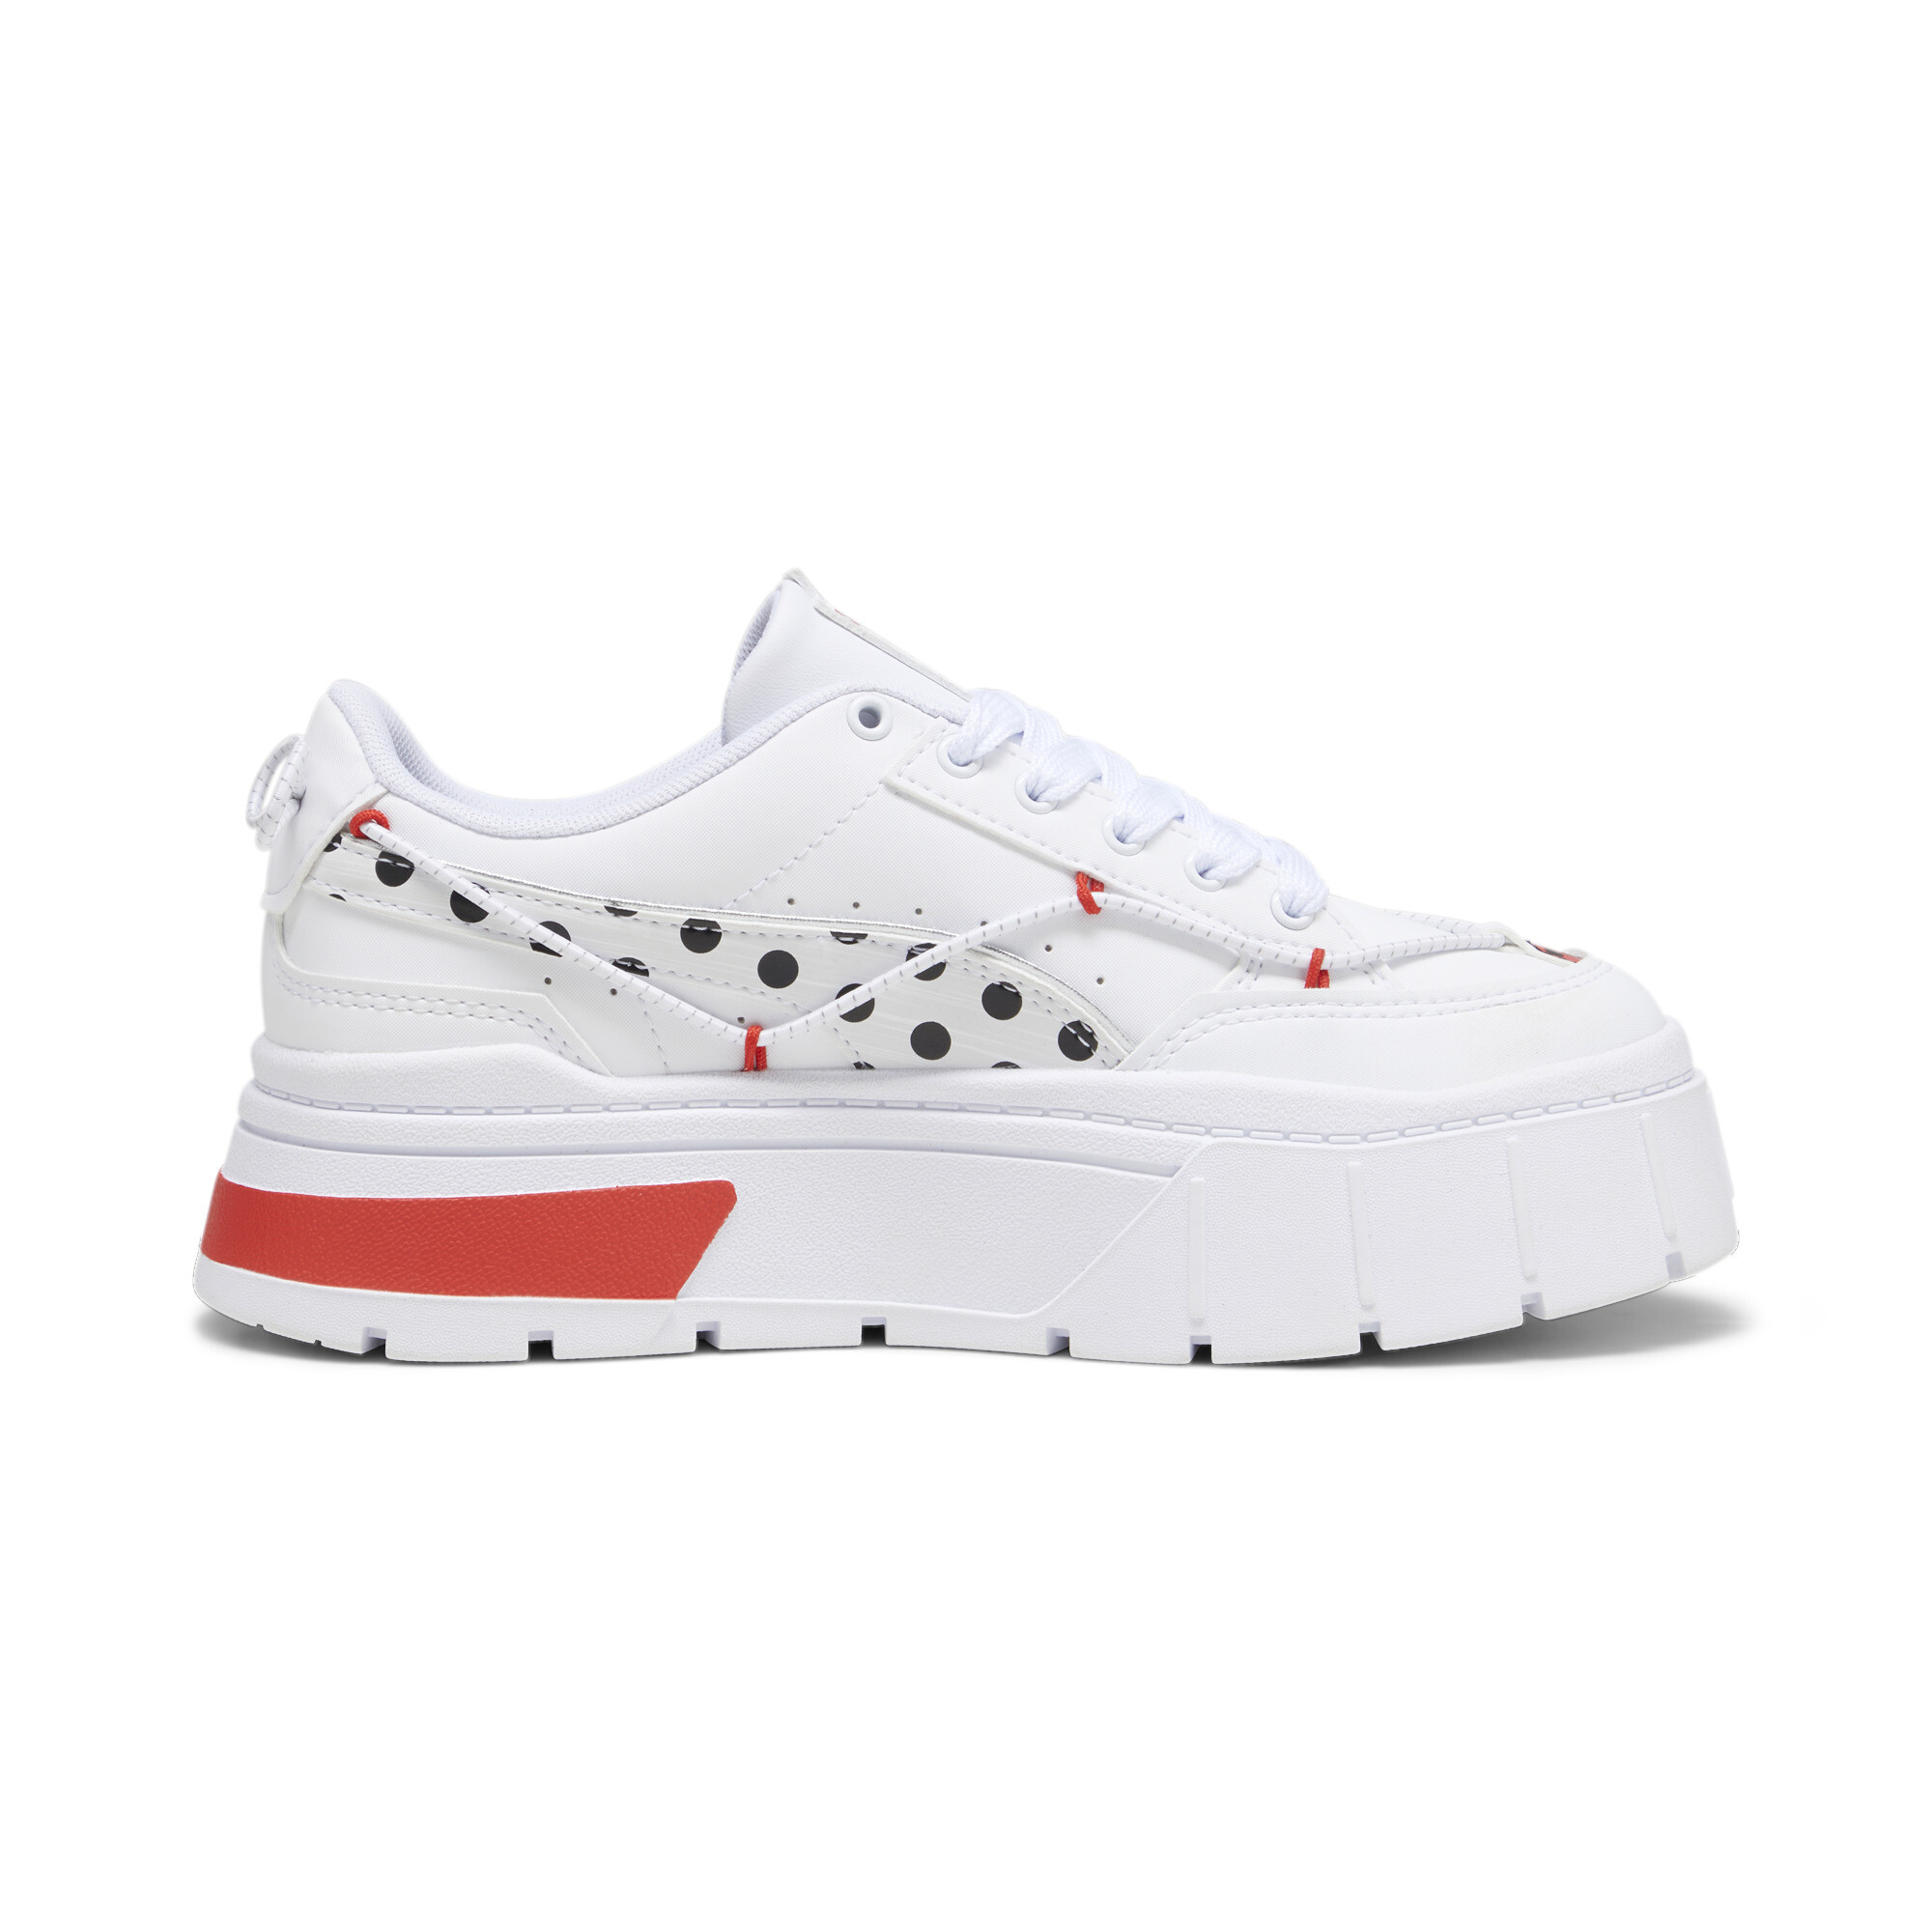 PUMA X MIRACULOUS Mayze Stack Youth Sneakers In White, Size EU 35.5